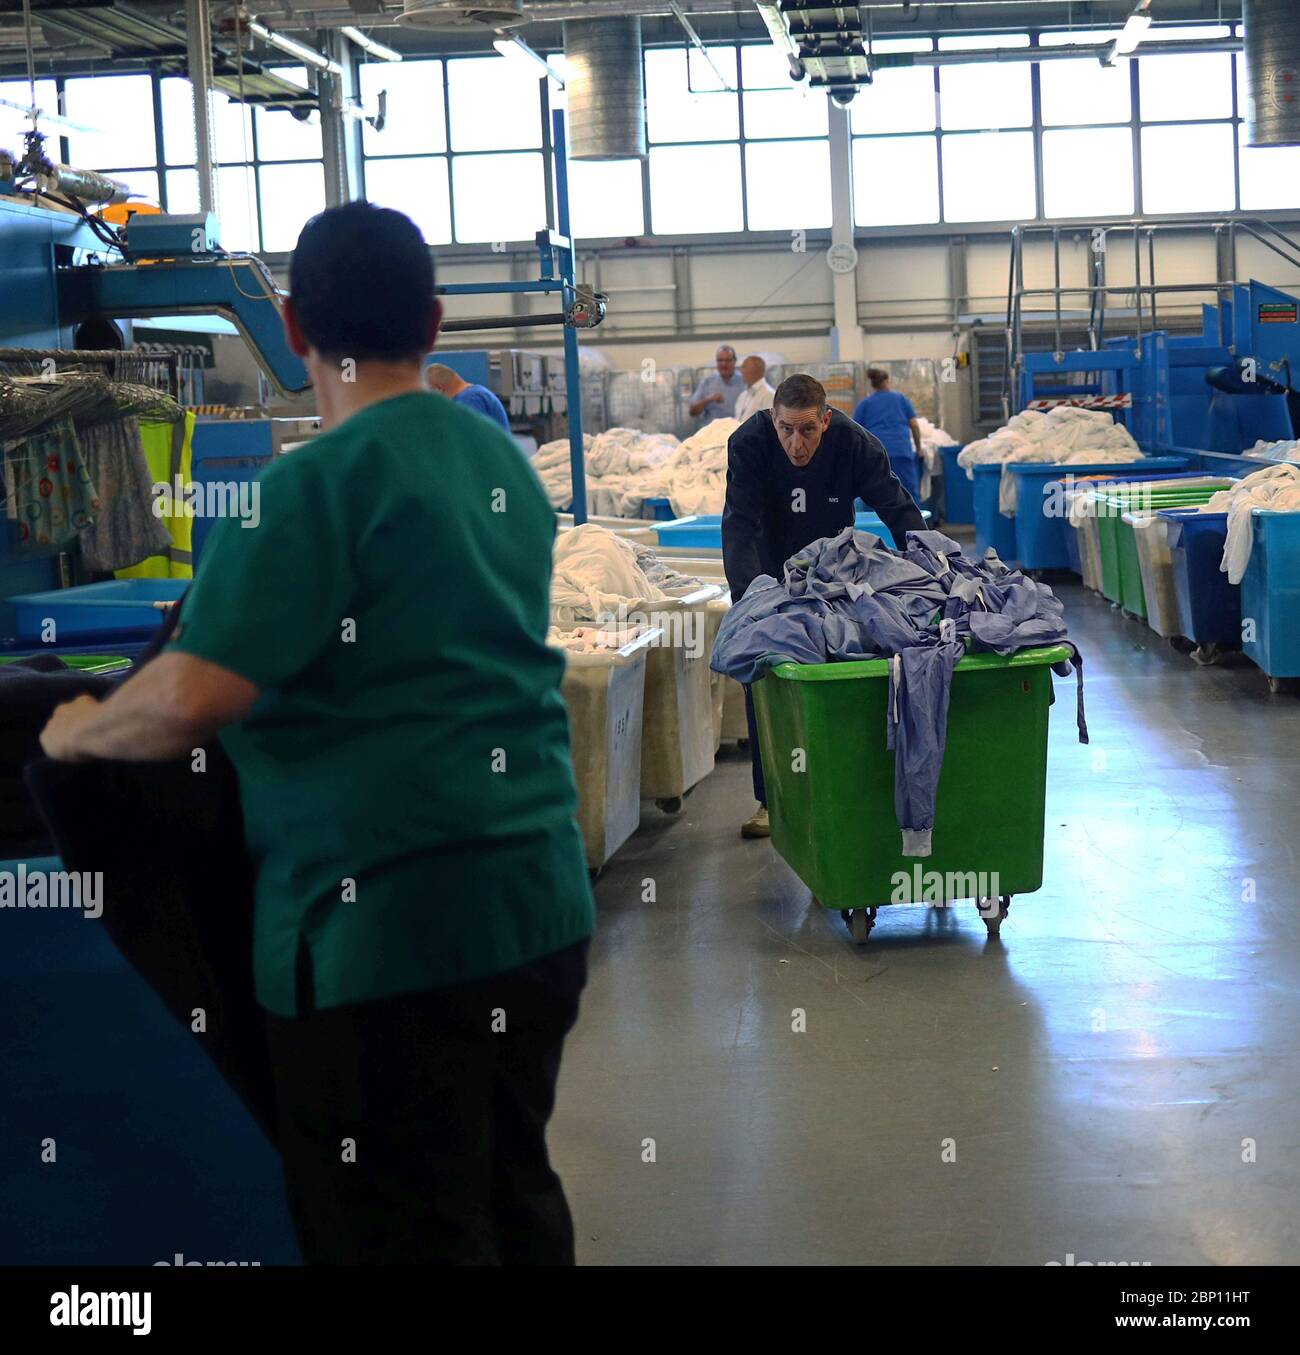 A laundry worker pushes a basket of gowns through the laundry and linen room at The Royal Blackburn Teaching Hospital in East Lancashire during the outbreak of the coronavirus disease. Stock Photo